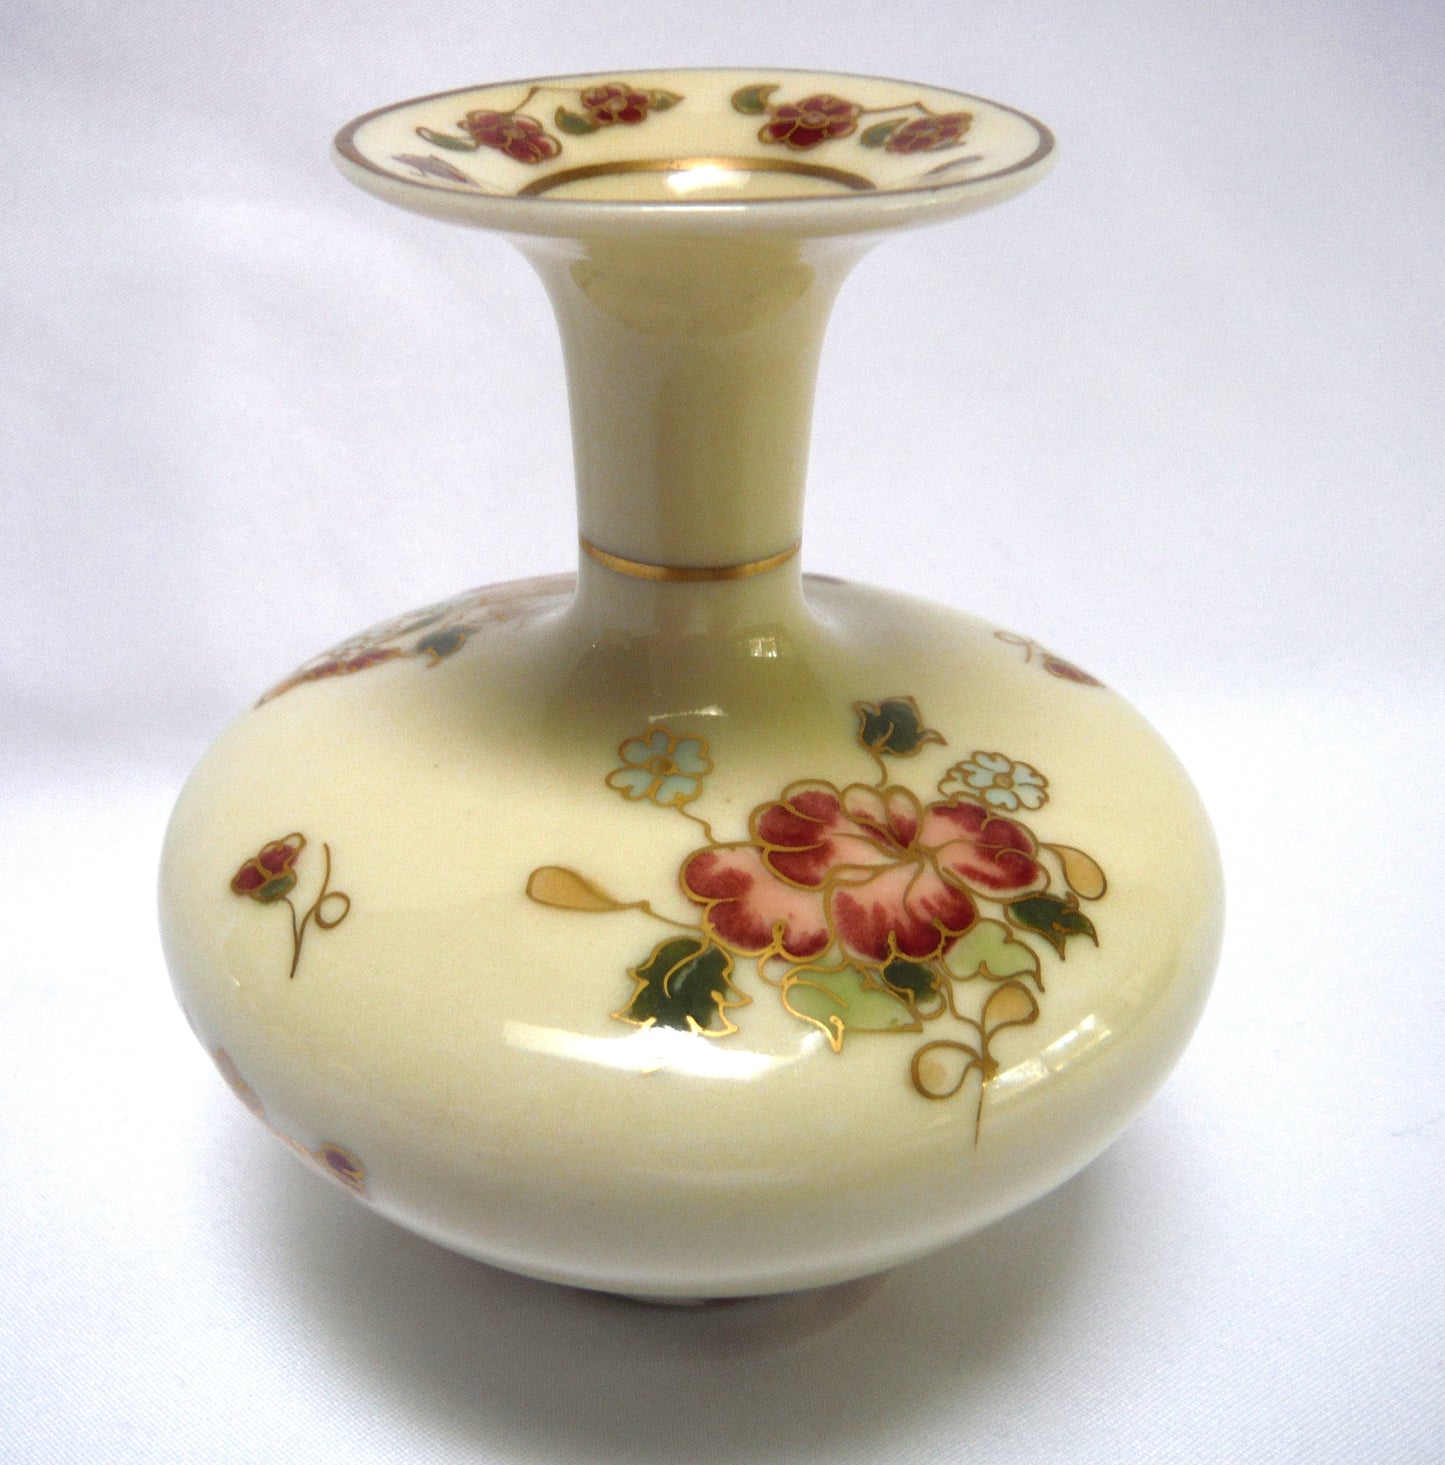 Vintage Miniature Vase, Stunningly Hand-Painted by ZSOLNAY EXCLUSIV PORCELAIN of Hungary